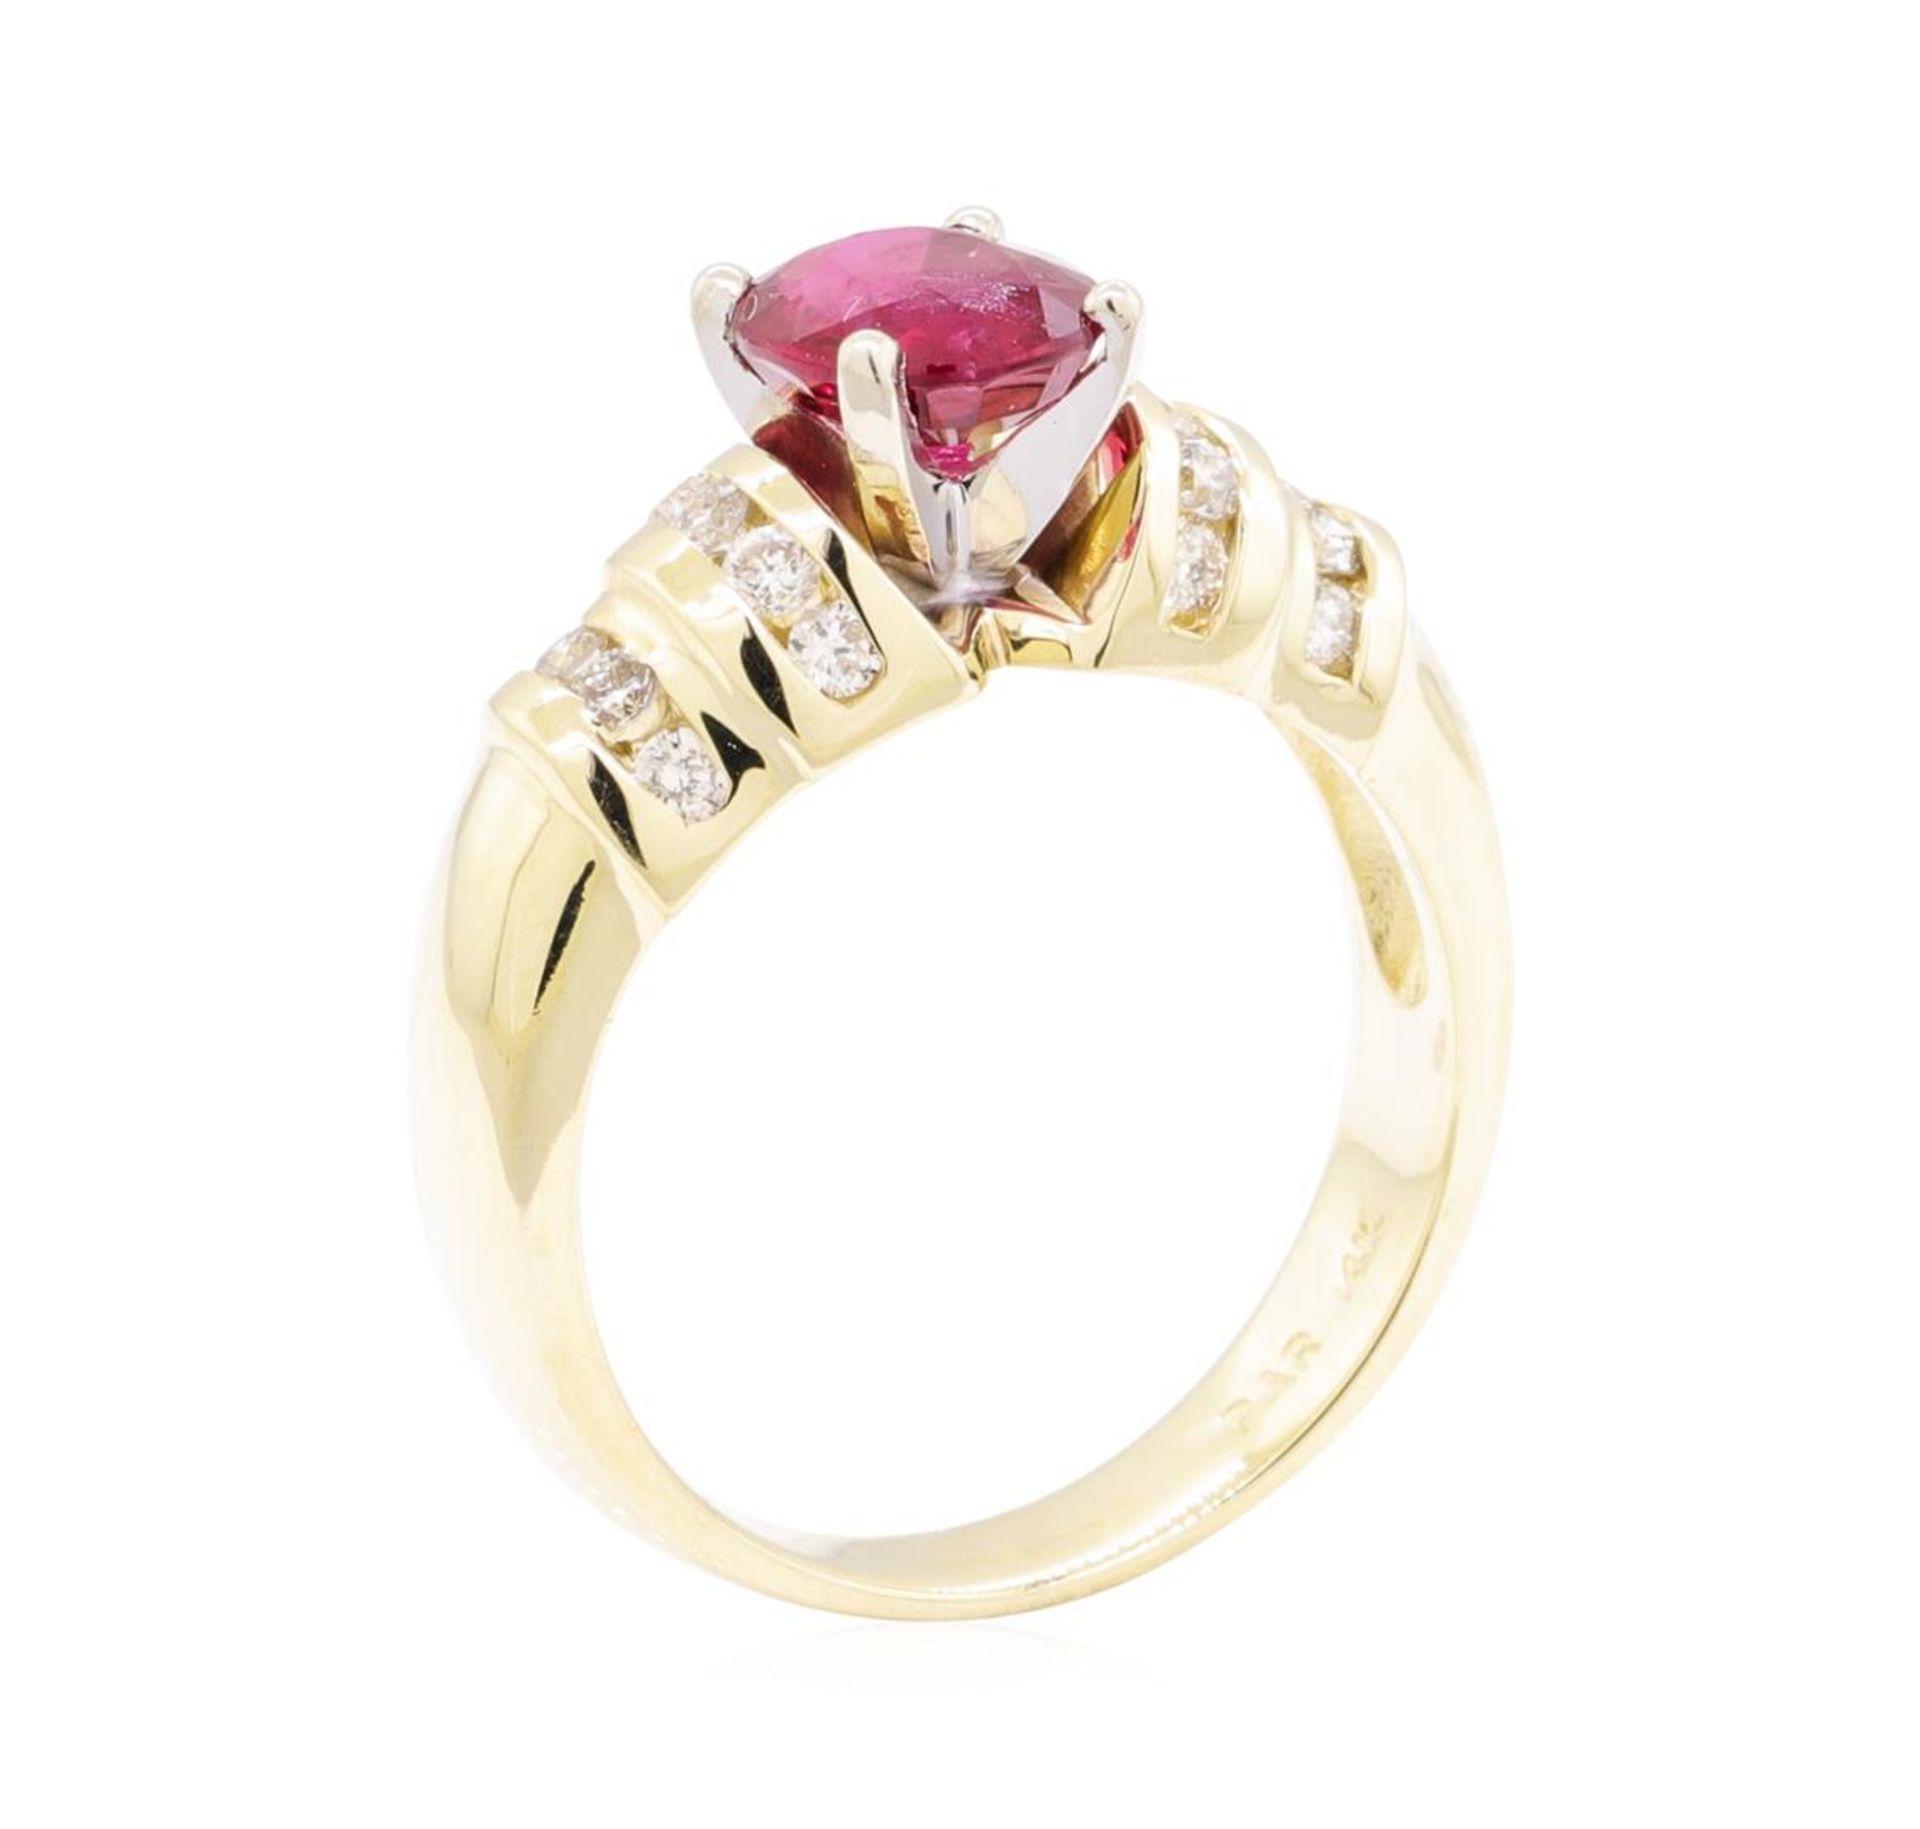 1.67 ctw Ruby And Diamond Ring - 14KT Yellow Gold - Image 4 of 5